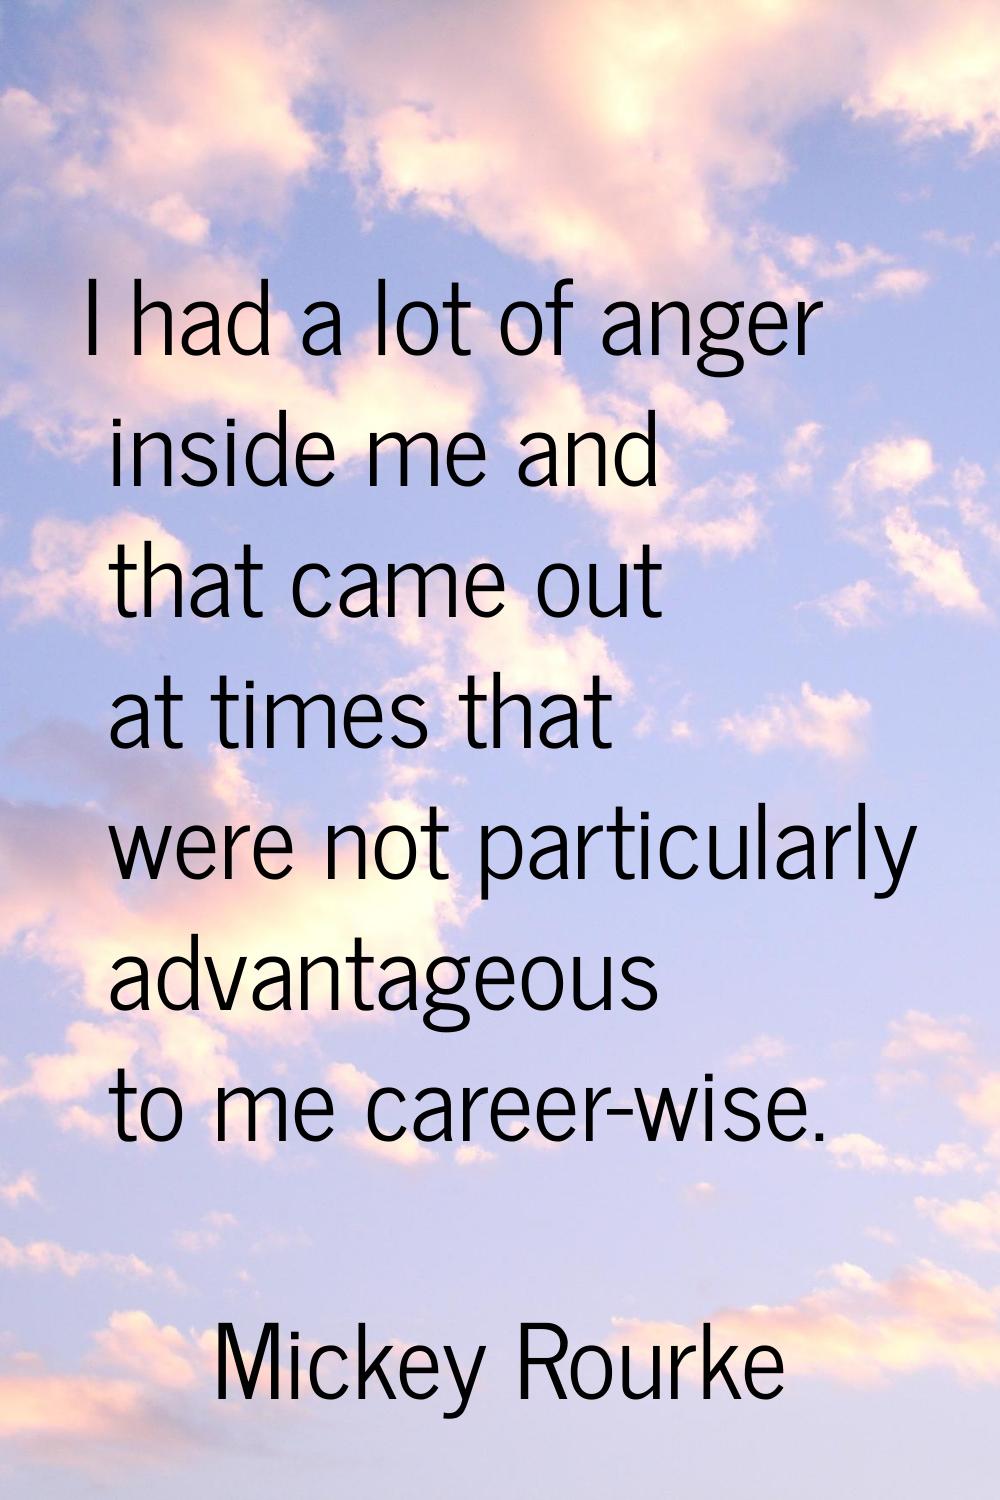 I had a lot of anger inside me and that came out at times that were not particularly advantageous t